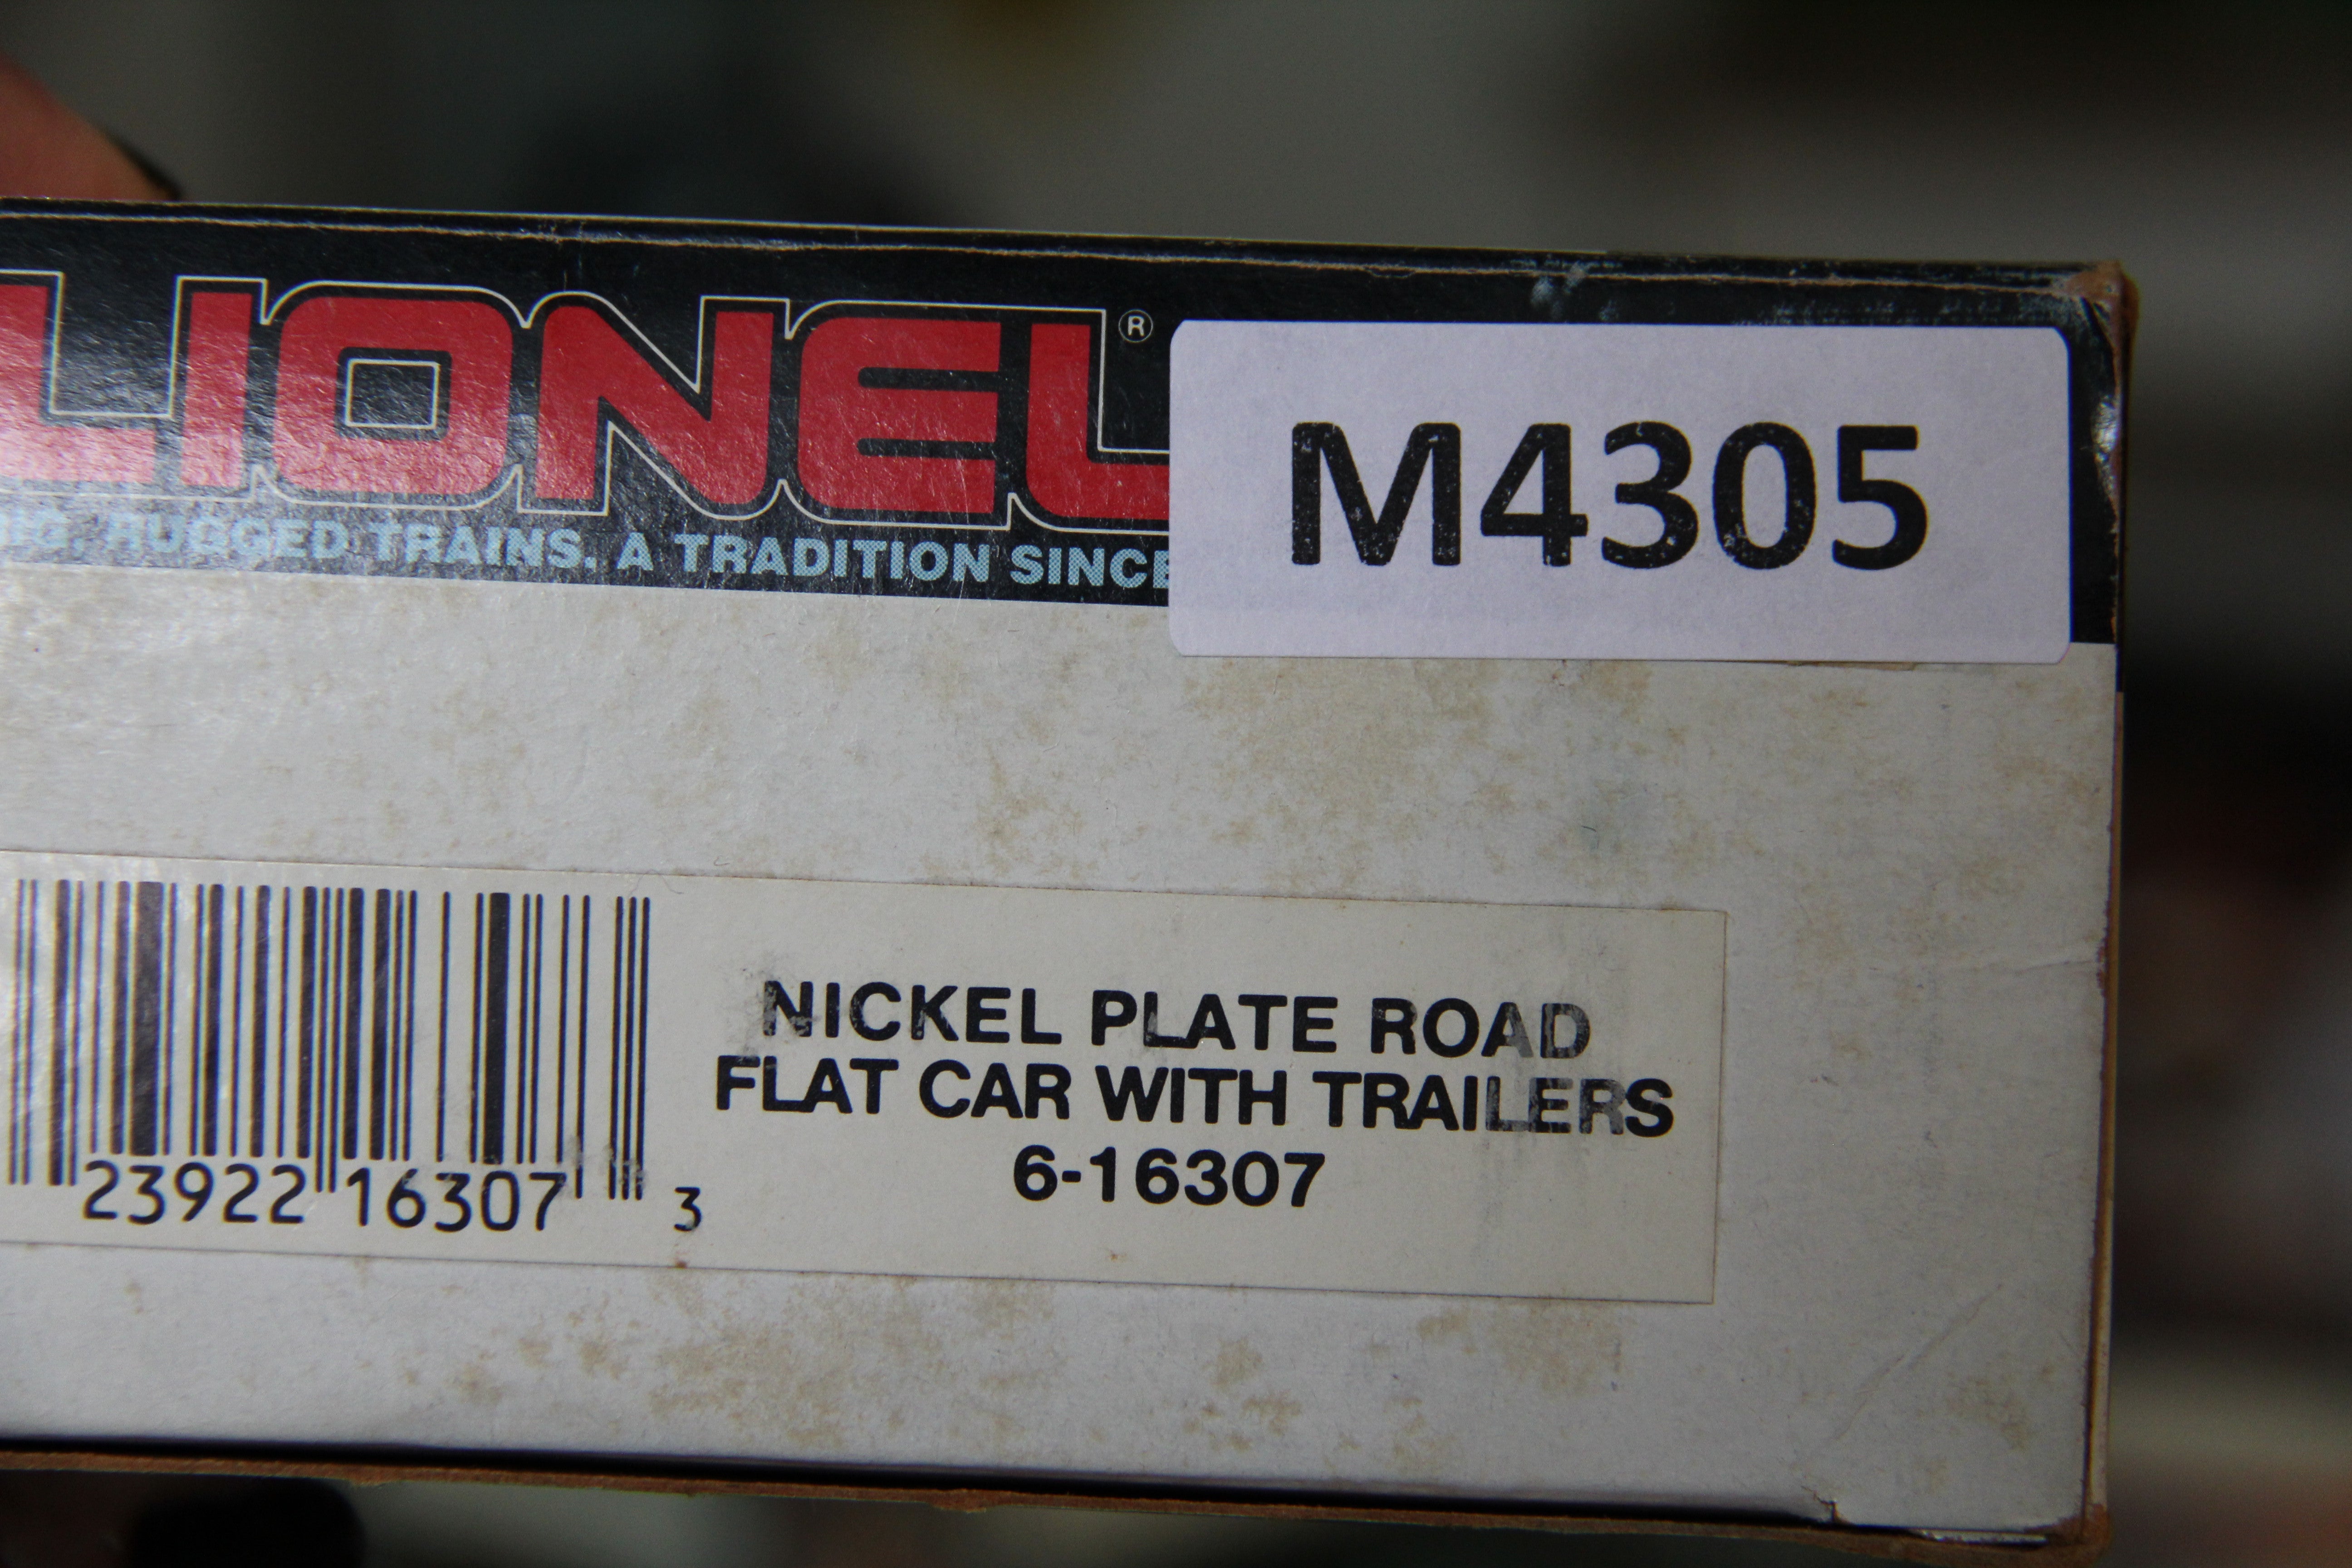 Lionel 6-16307 Nickel Plate Road Flat Car w/ Trailers-Second hand-M4305